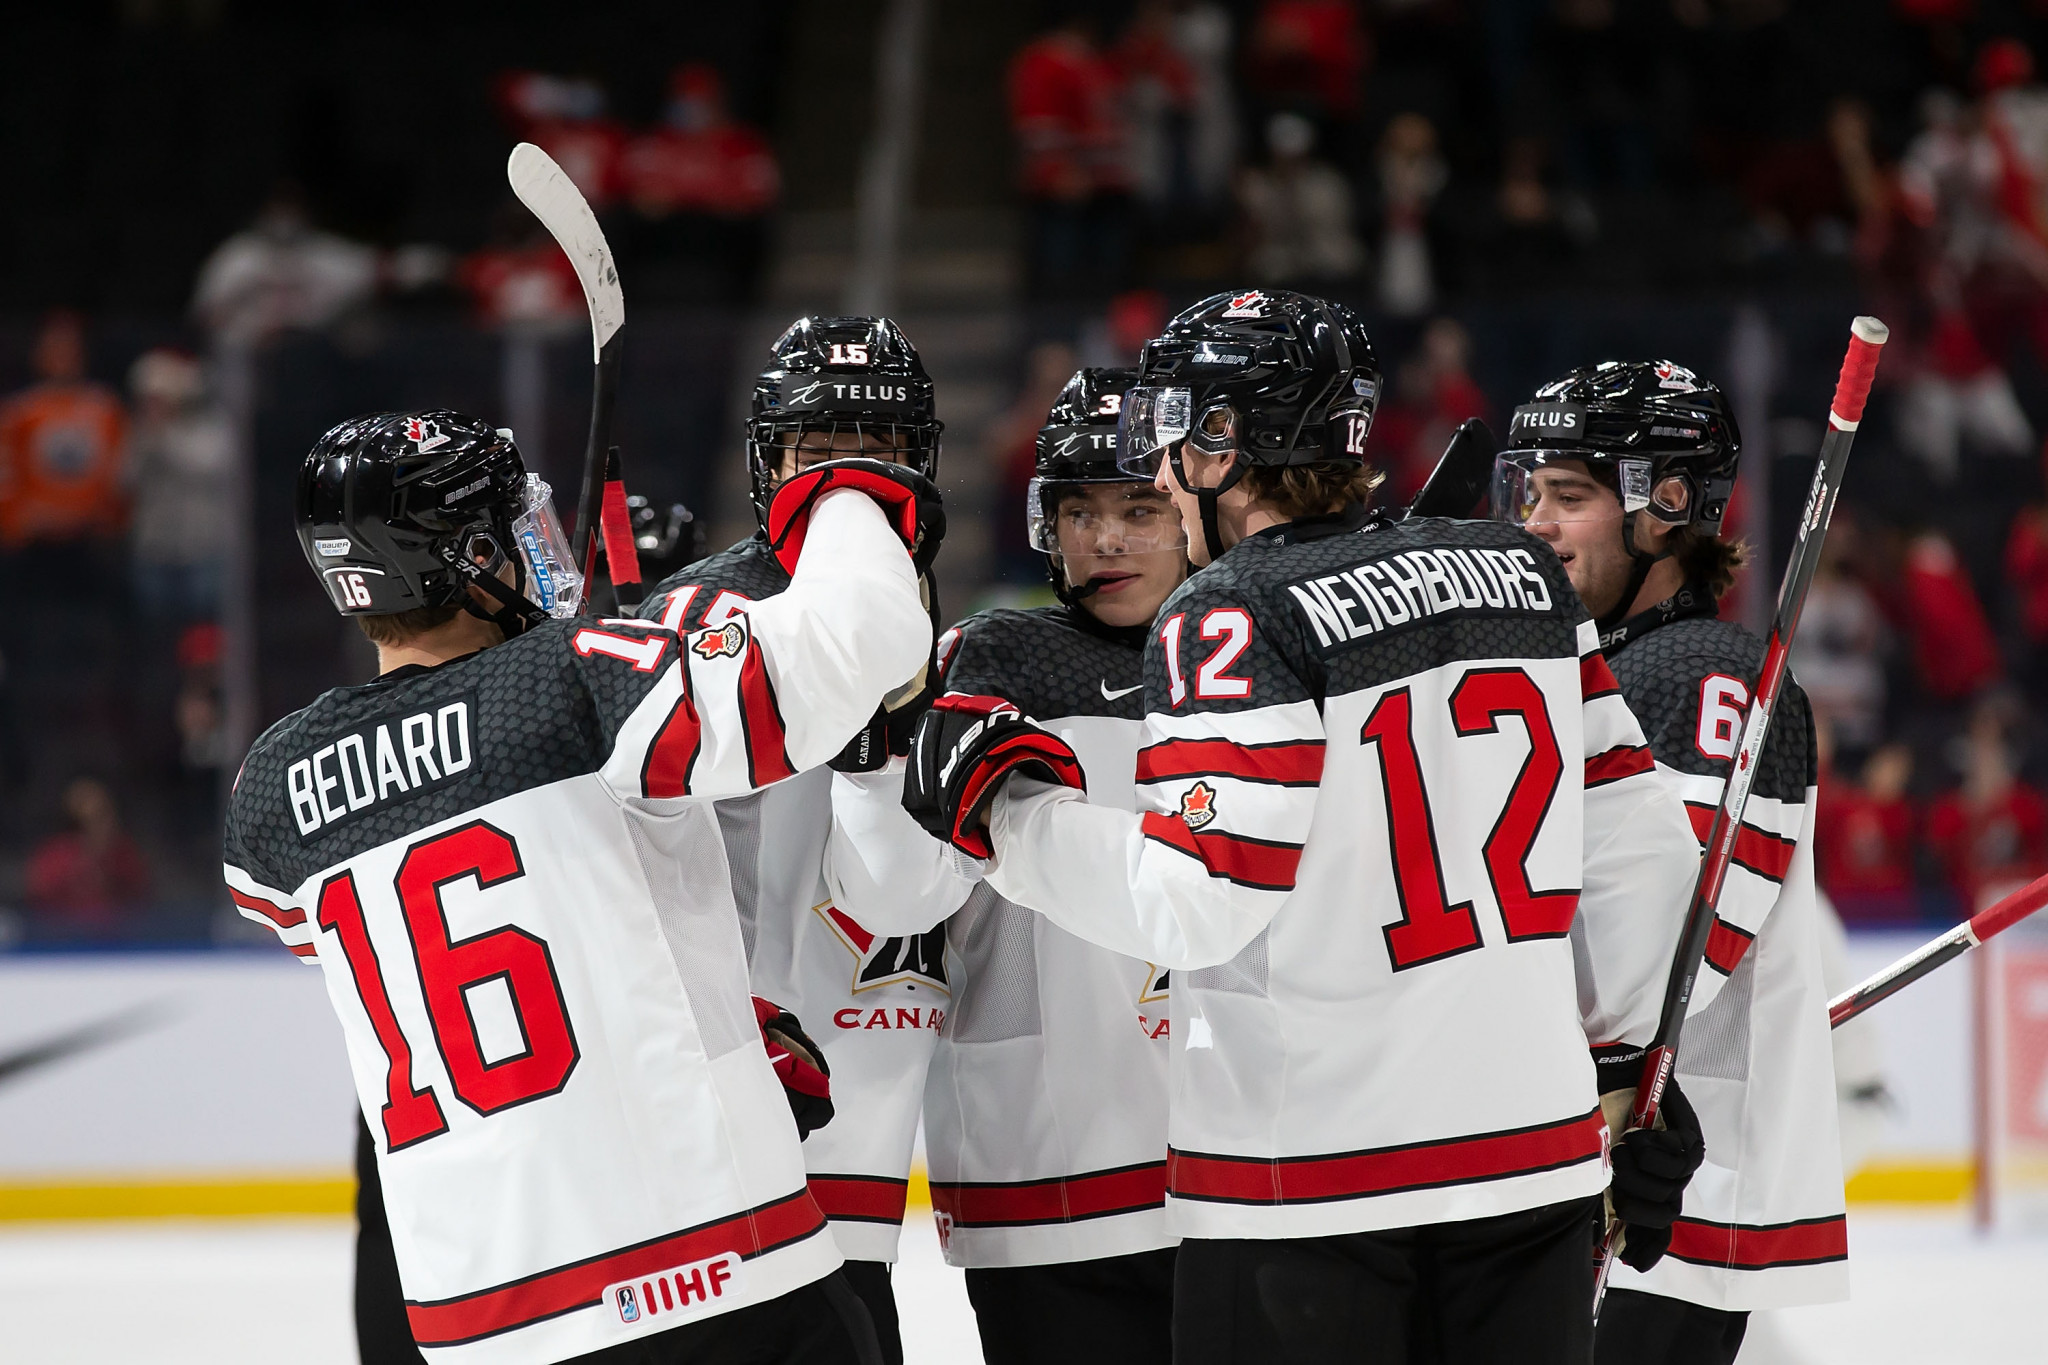 Halifax and Moncton to stage IIHF World Junior Championship taken away from Russia